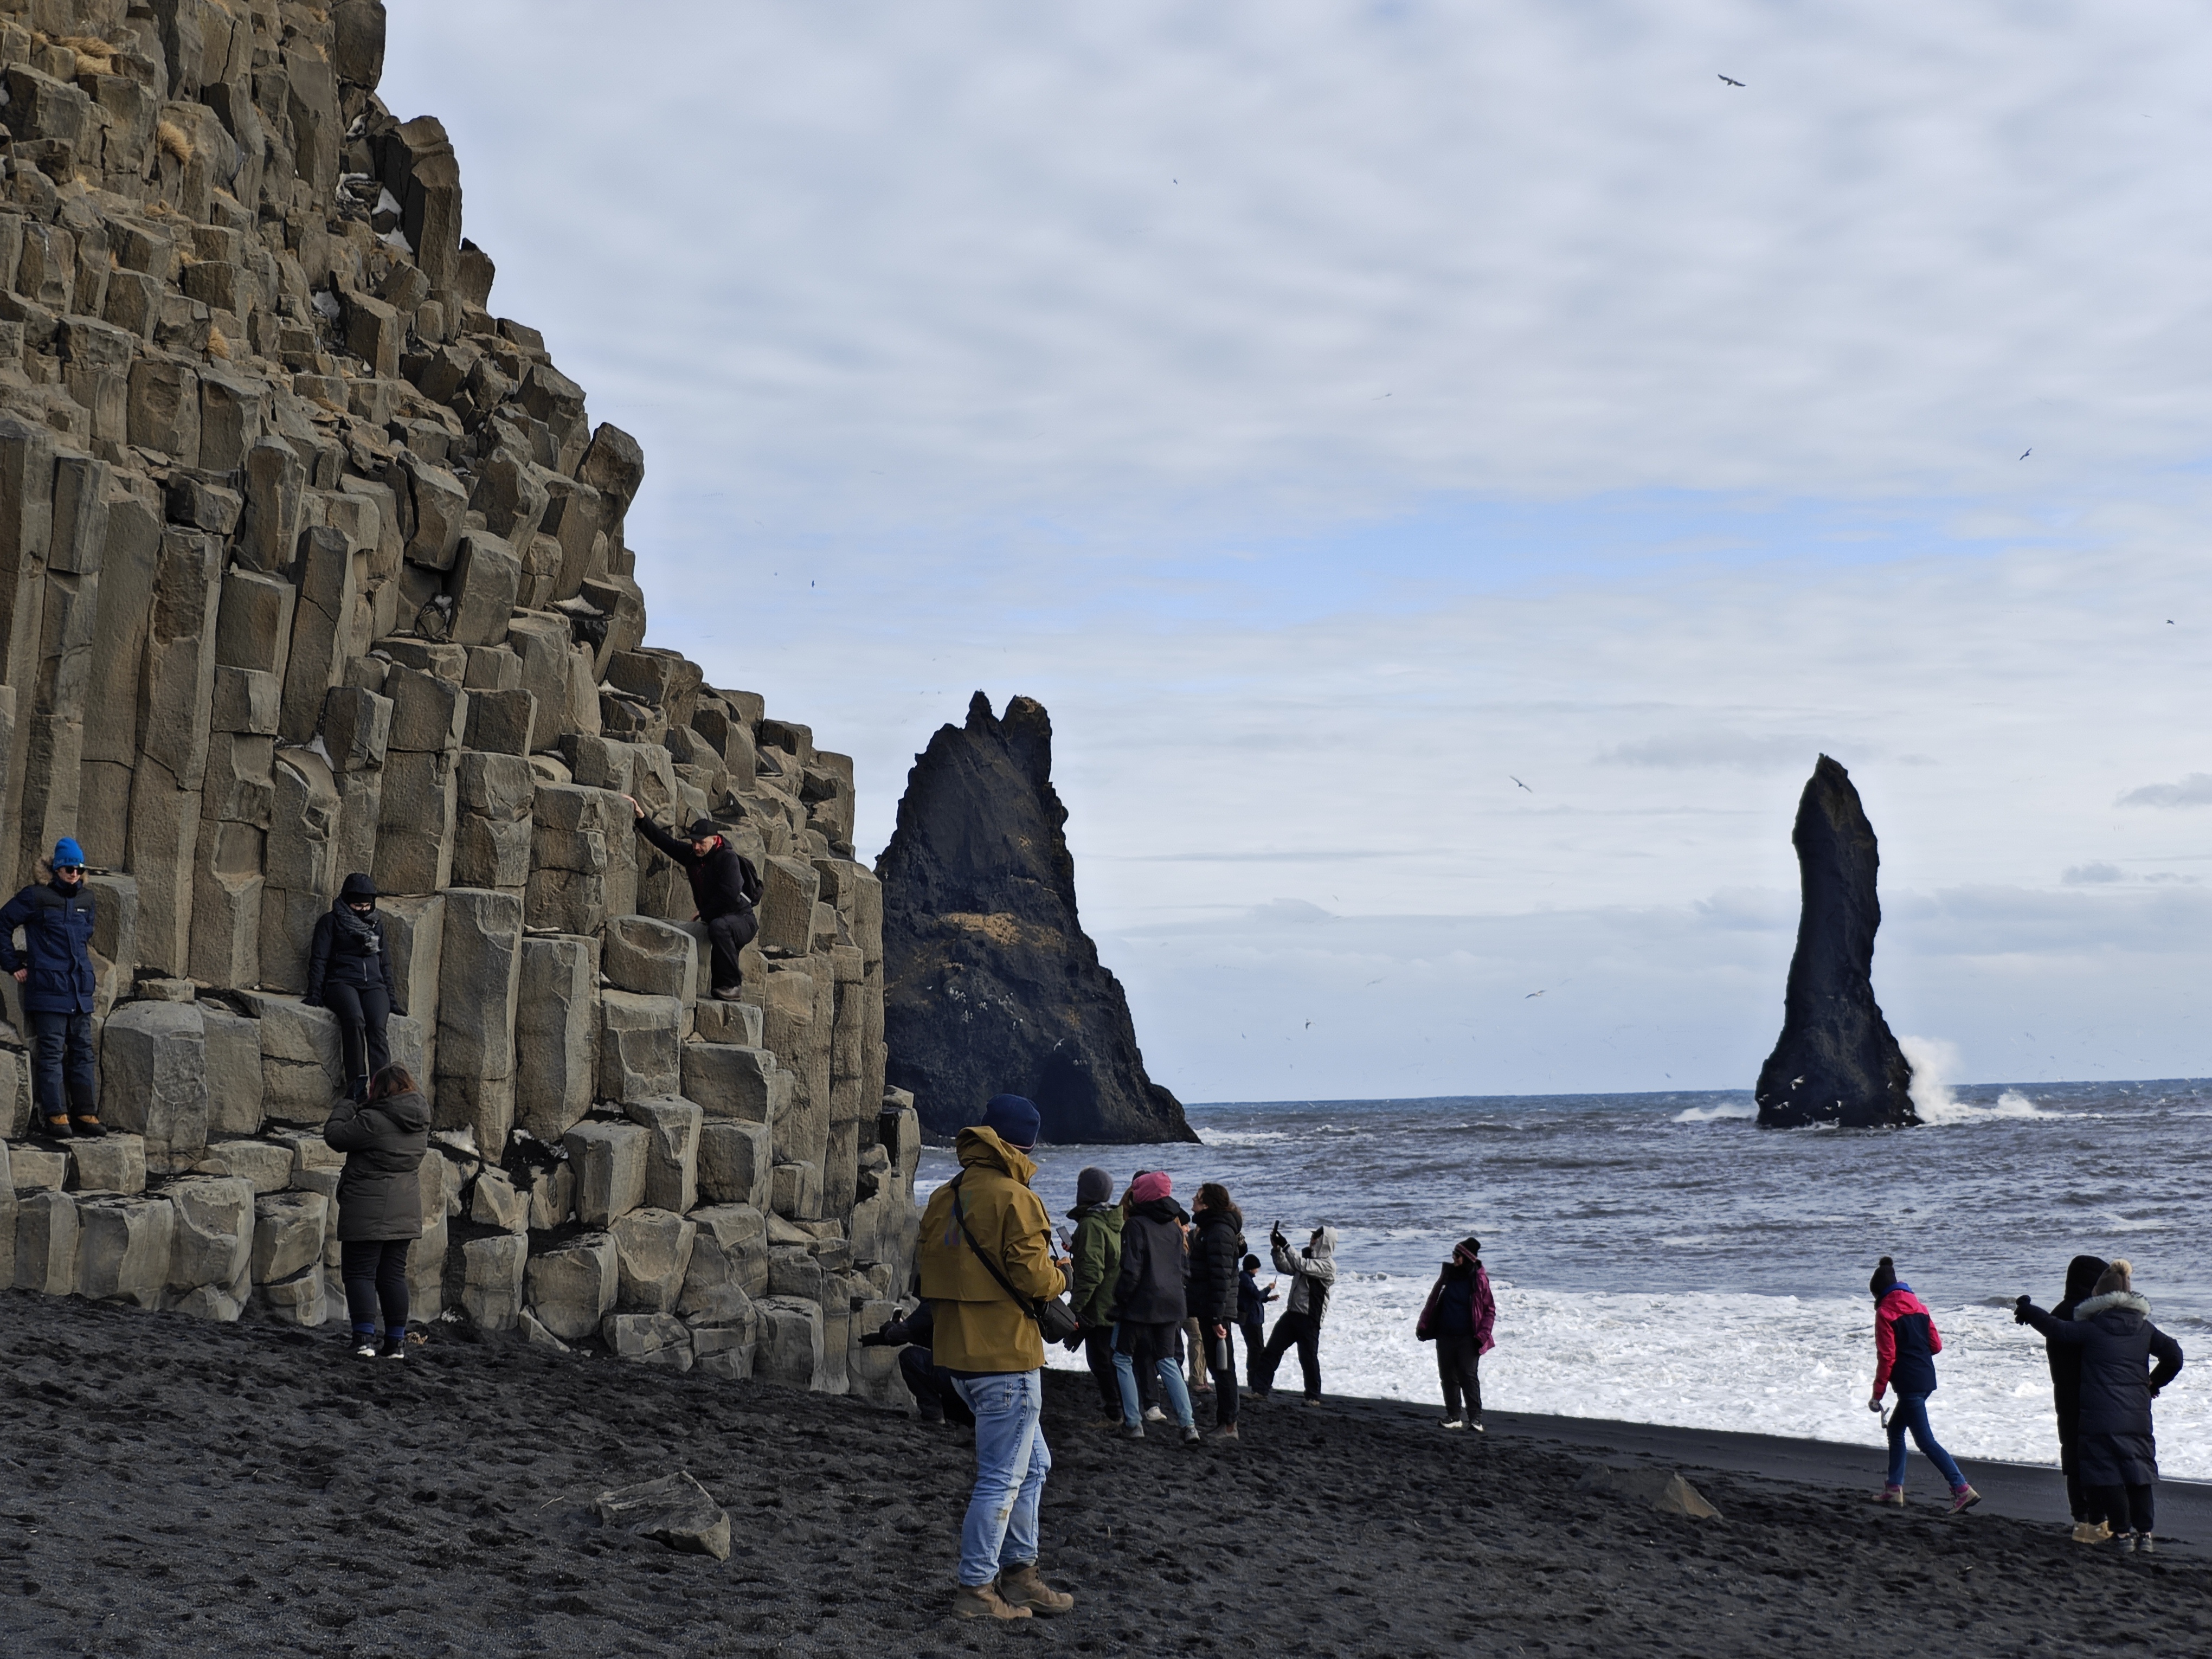 Black sand beach with people in the foreground.